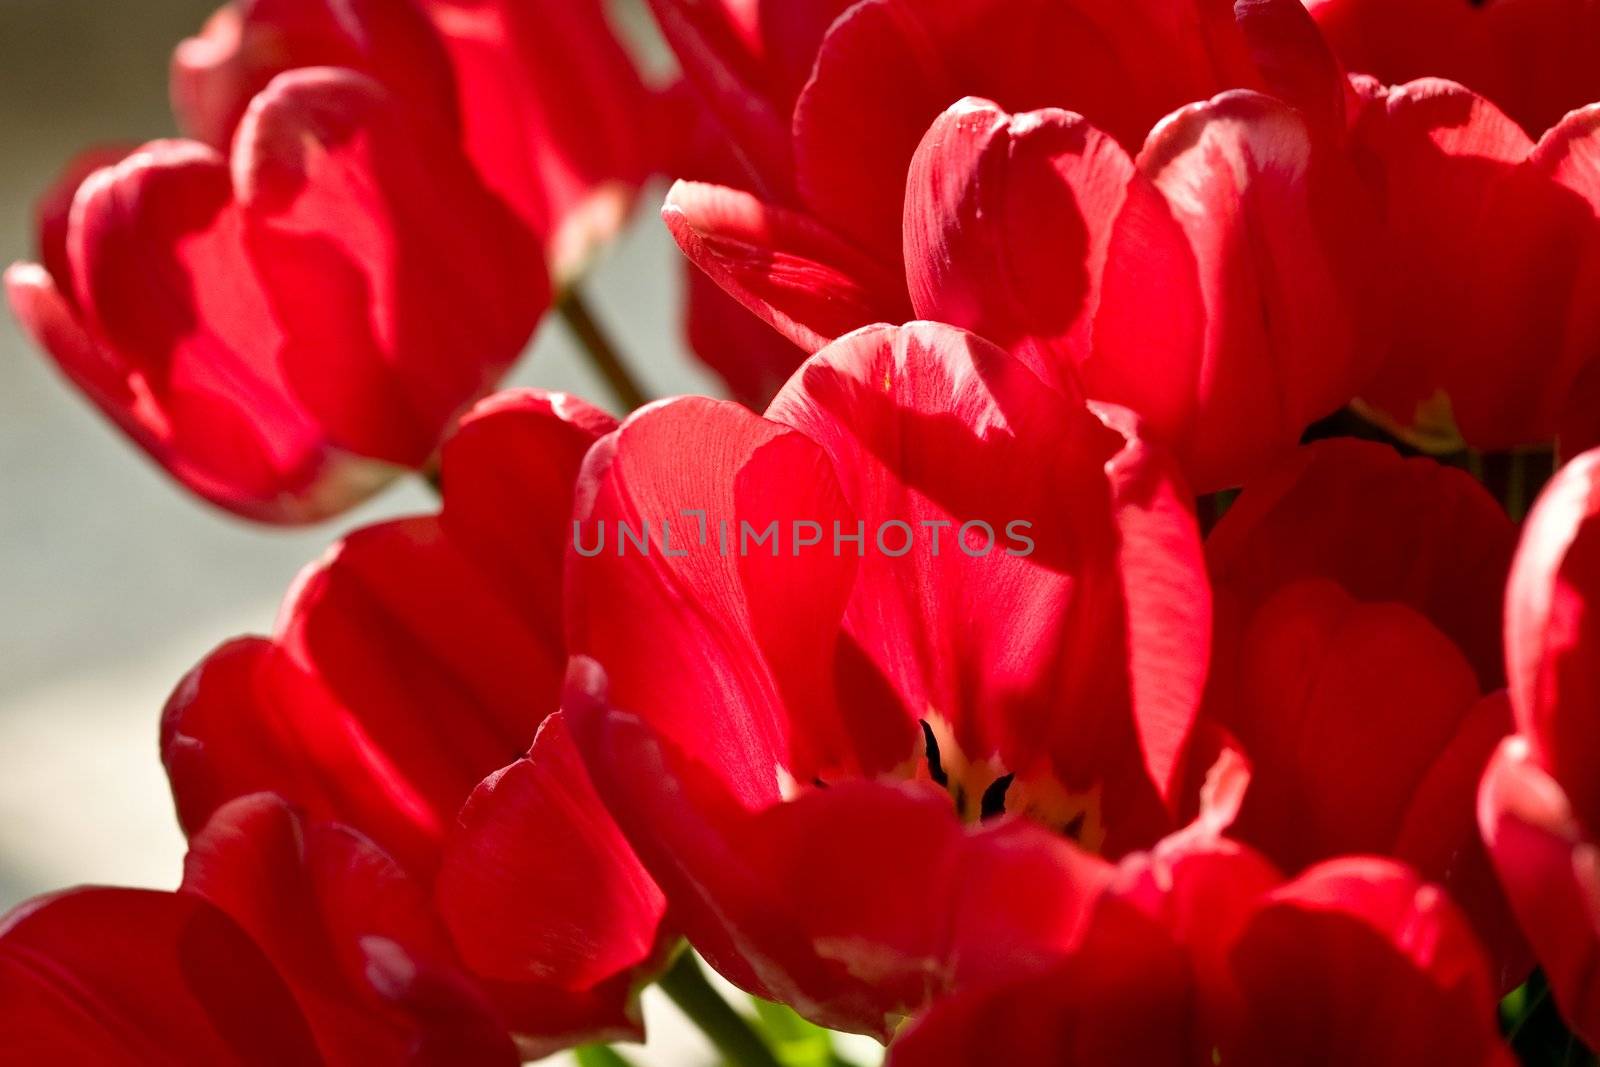 flower series: red tulips bouquet texture